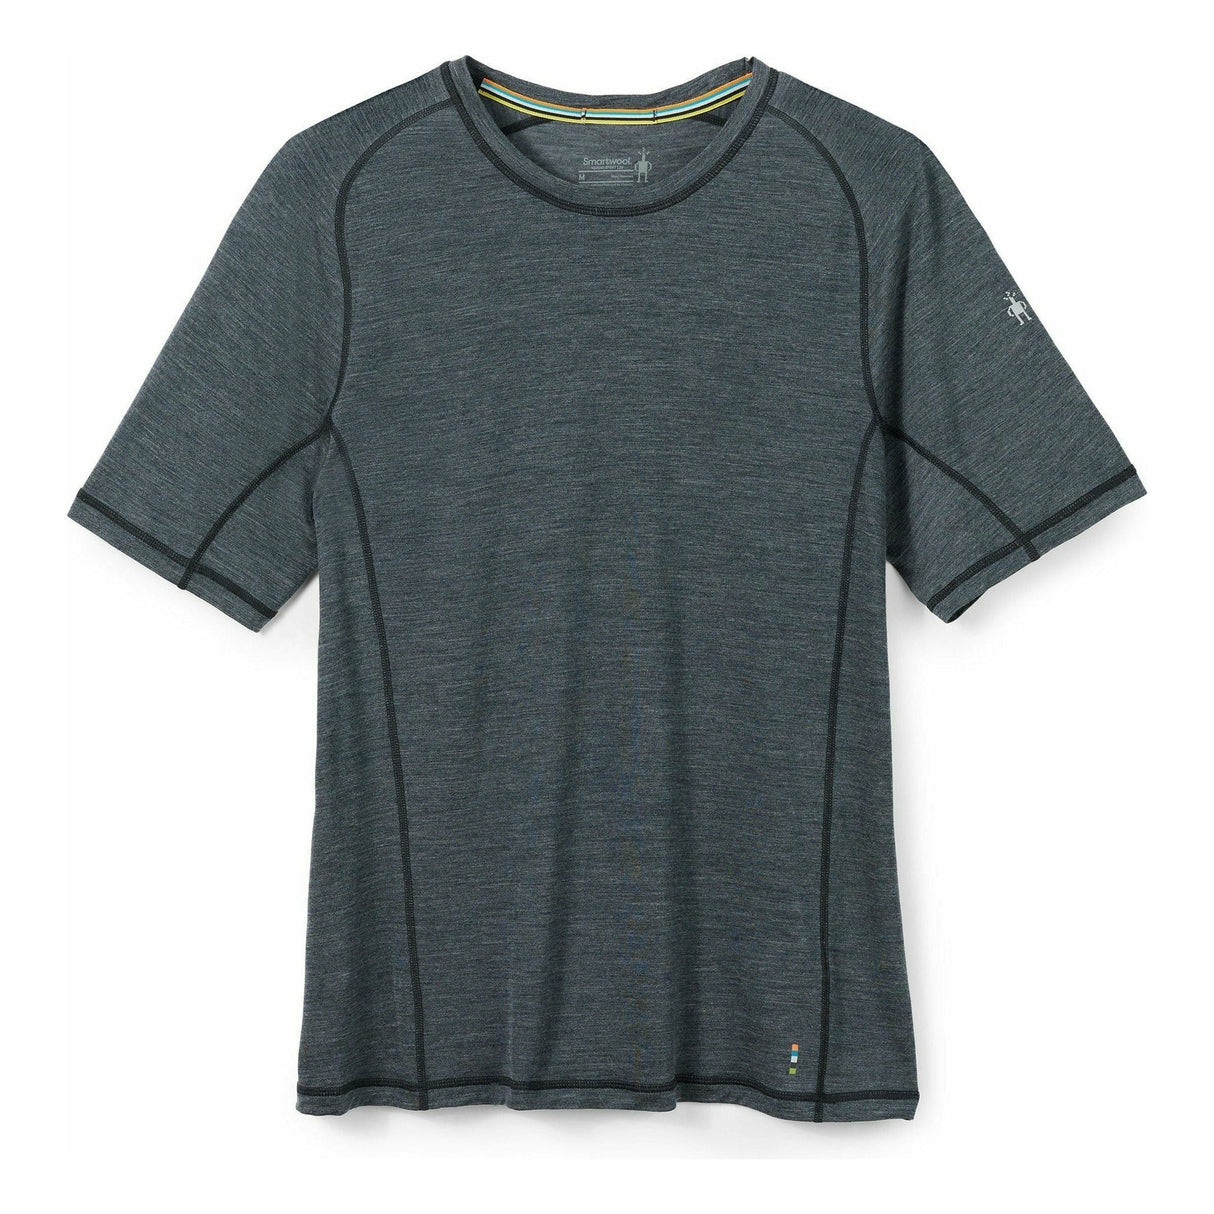 Smartwool Mens Active Ultralite Short Sleeve  -  Small / Charcoal Heather